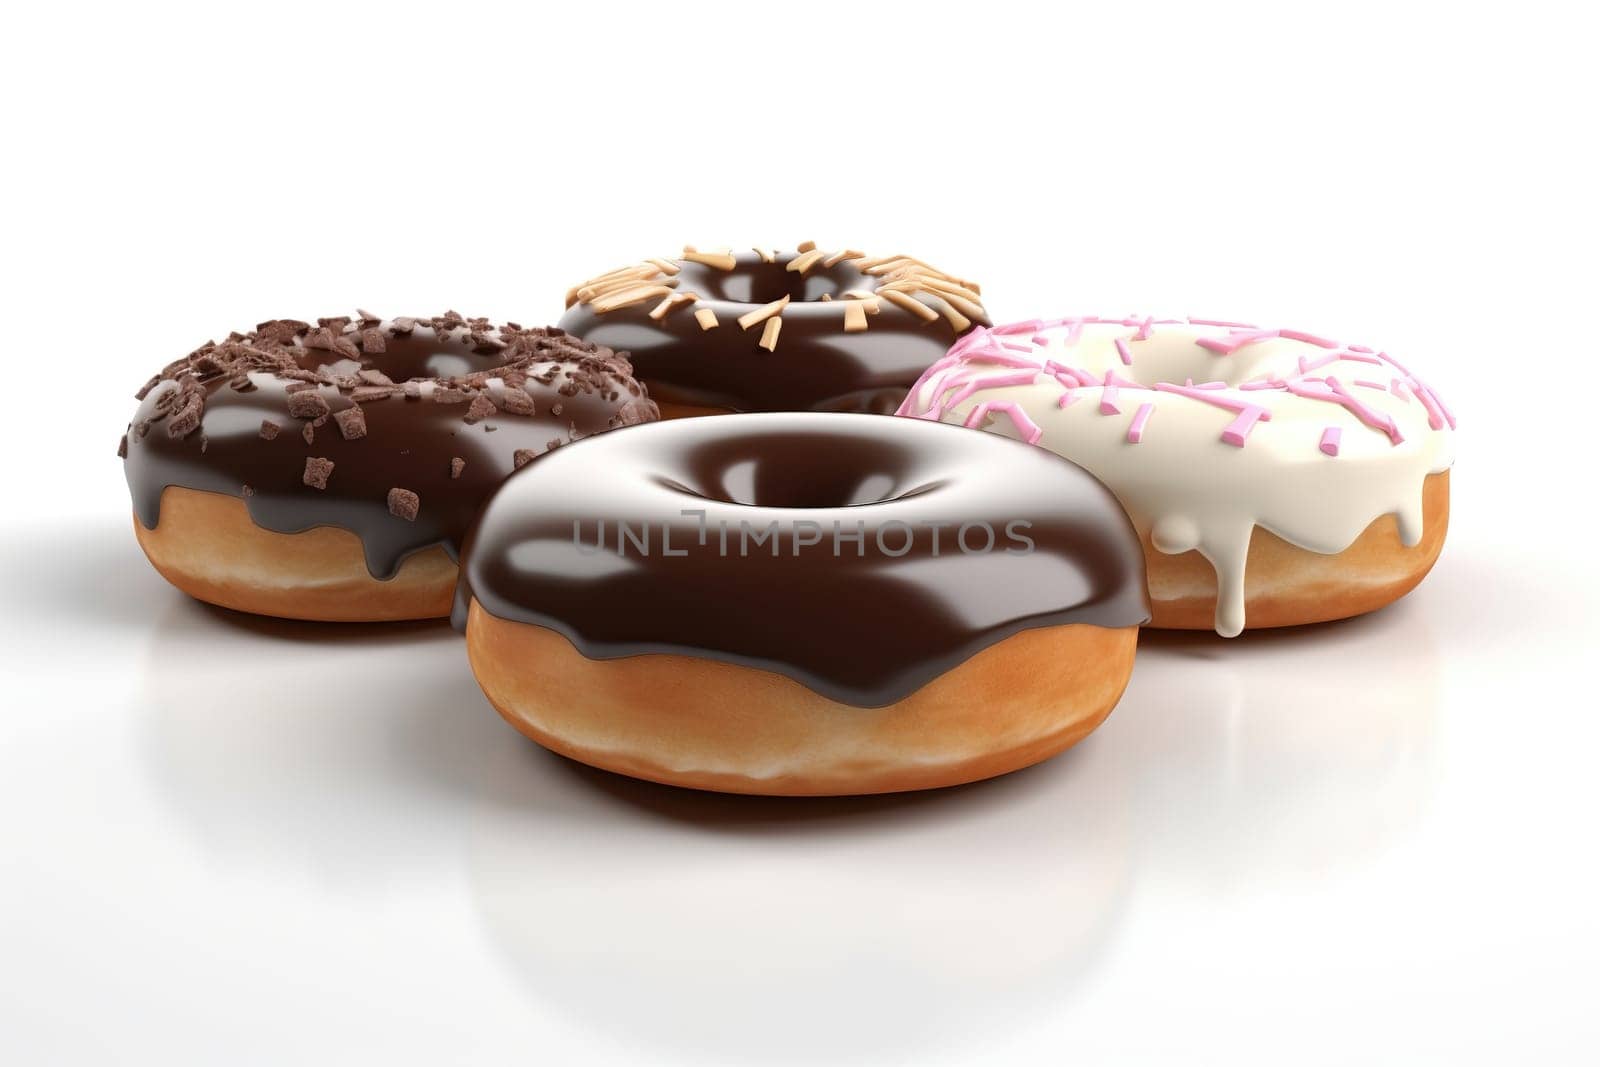 3D illustration of delicious donuts poured with a glaze by tan4ikk1